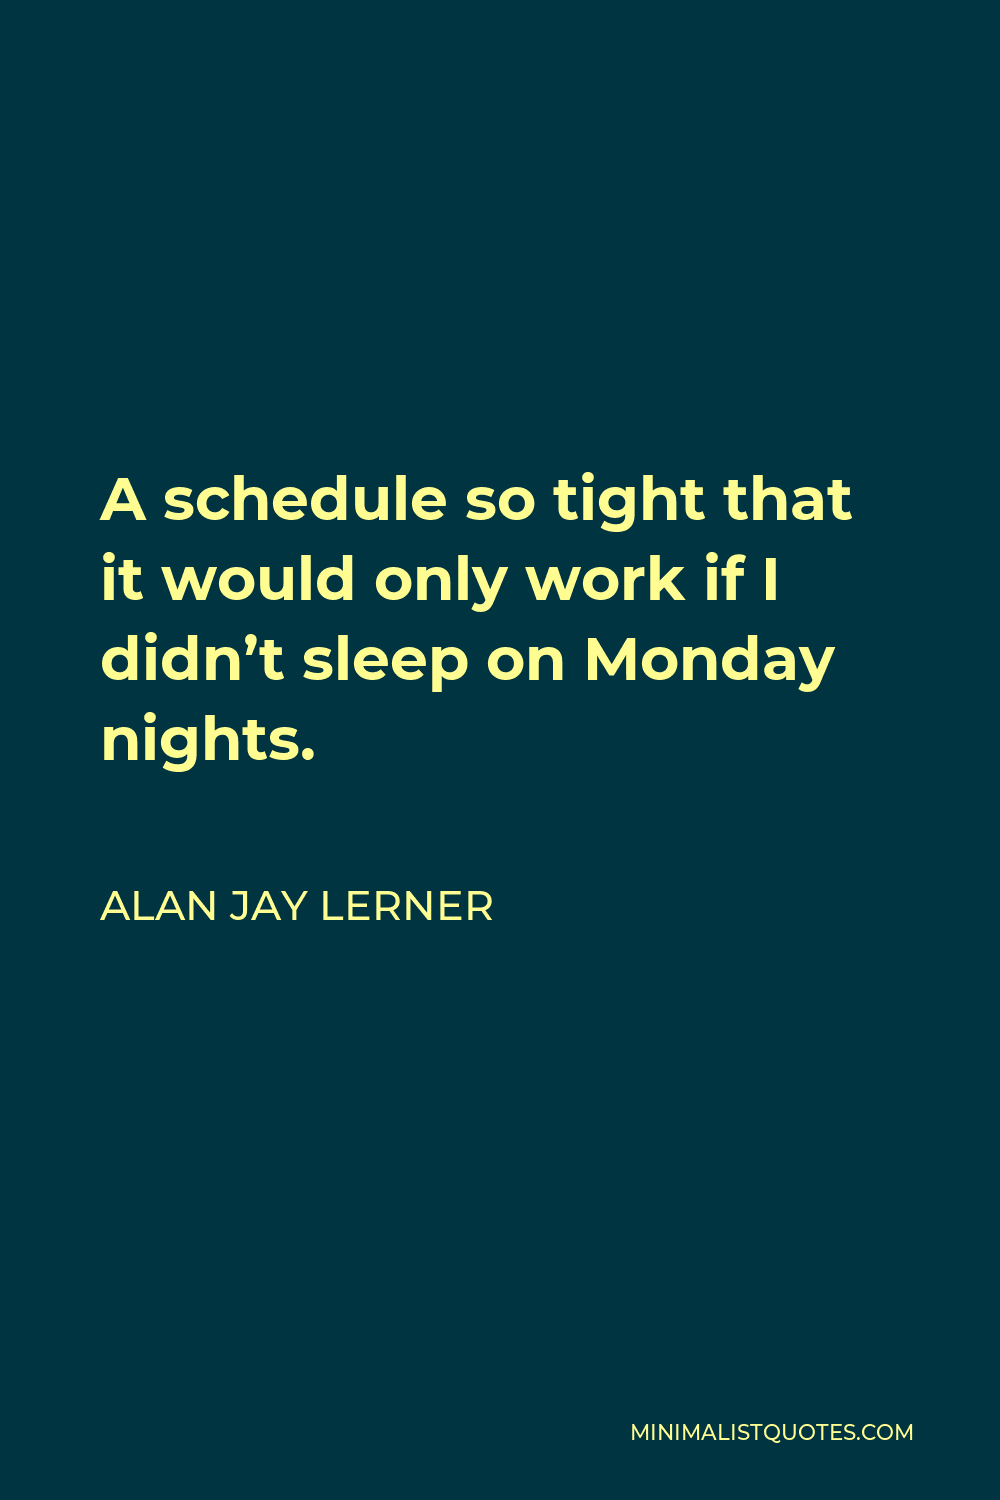 Alan Jay Lerner Quote - A schedule so tight that it would only work if I didn’t sleep on Monday nights.